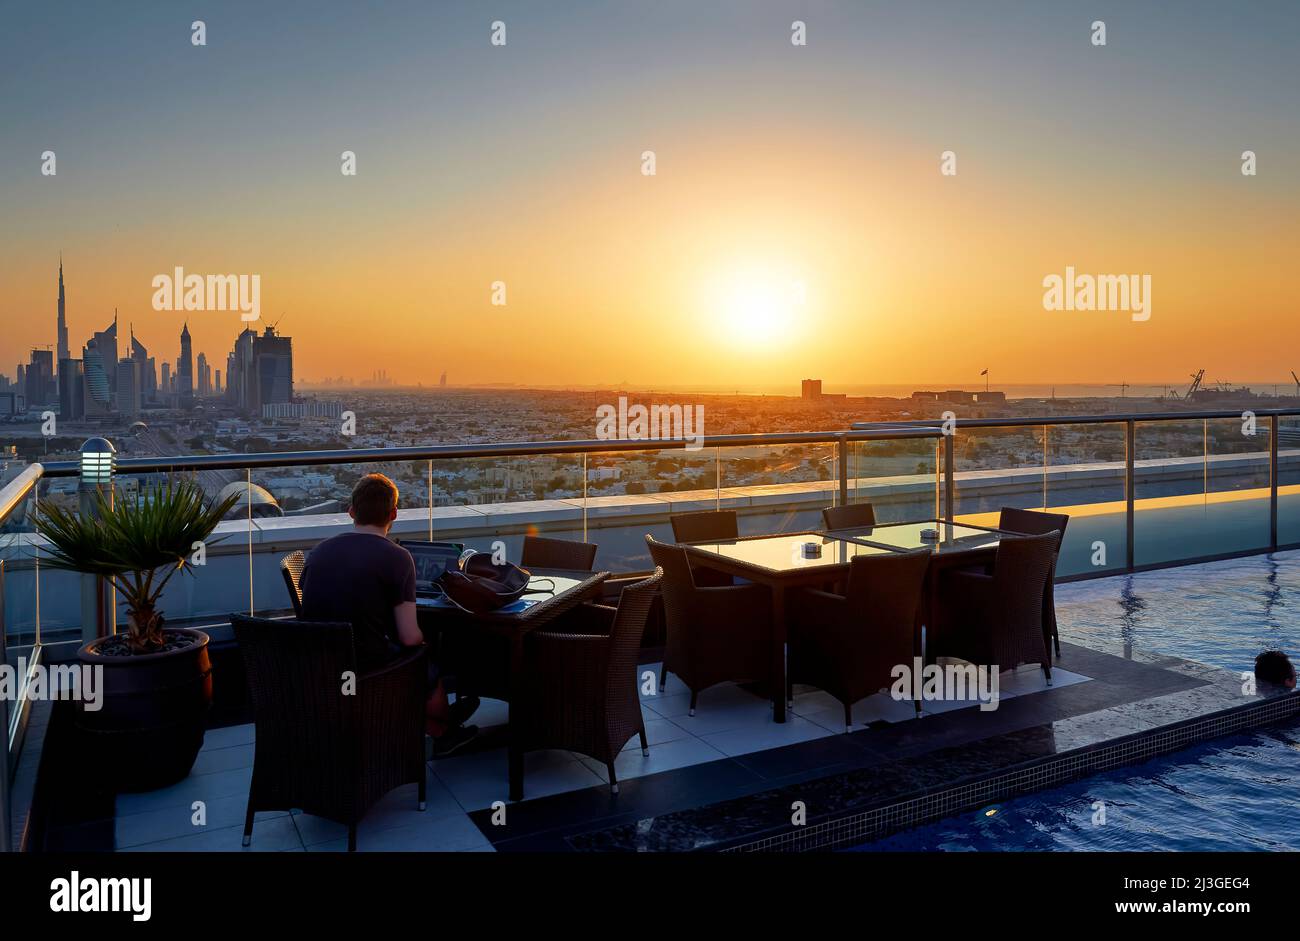 Dubai. UAE. Smartworking at sunset from a rooftop hotel pool Stock Photo